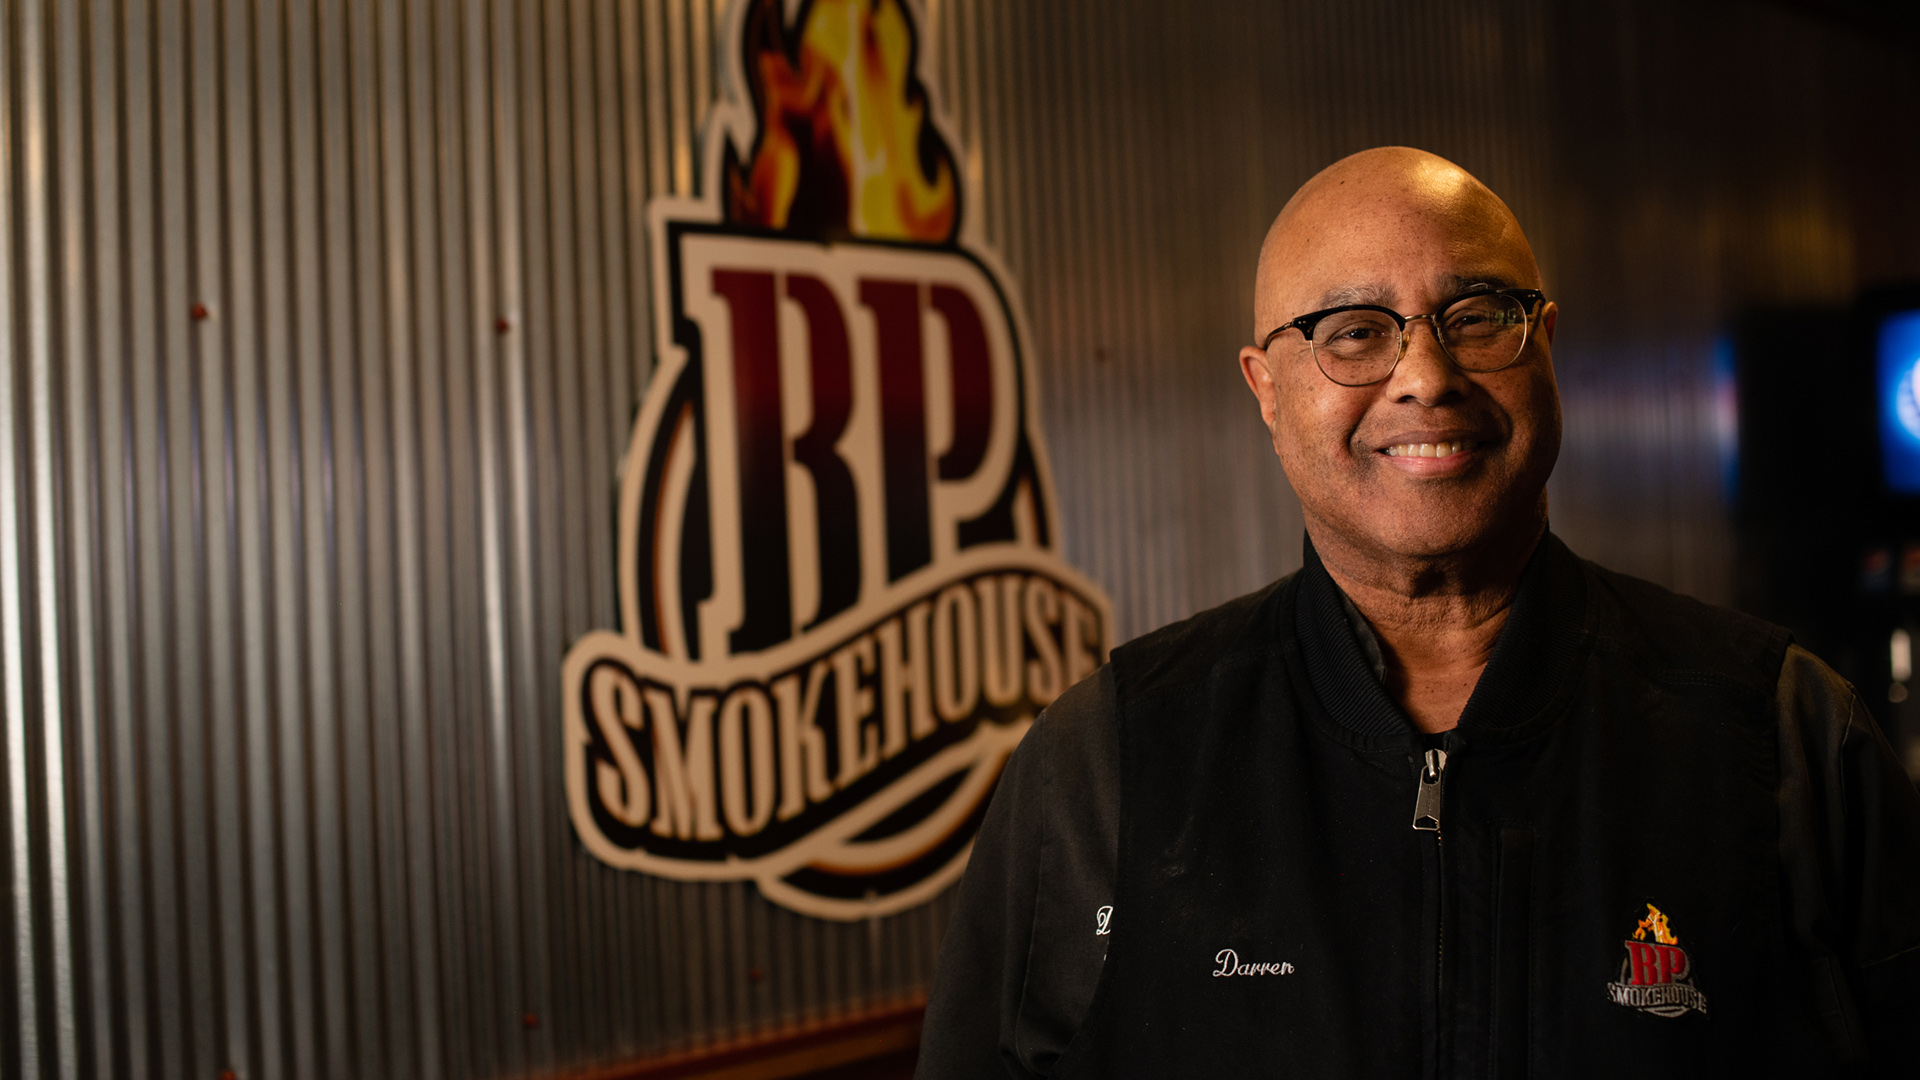 Darren Price smiles for a photo while standing in front of metal wall panels with a BP Smokehouse logo.